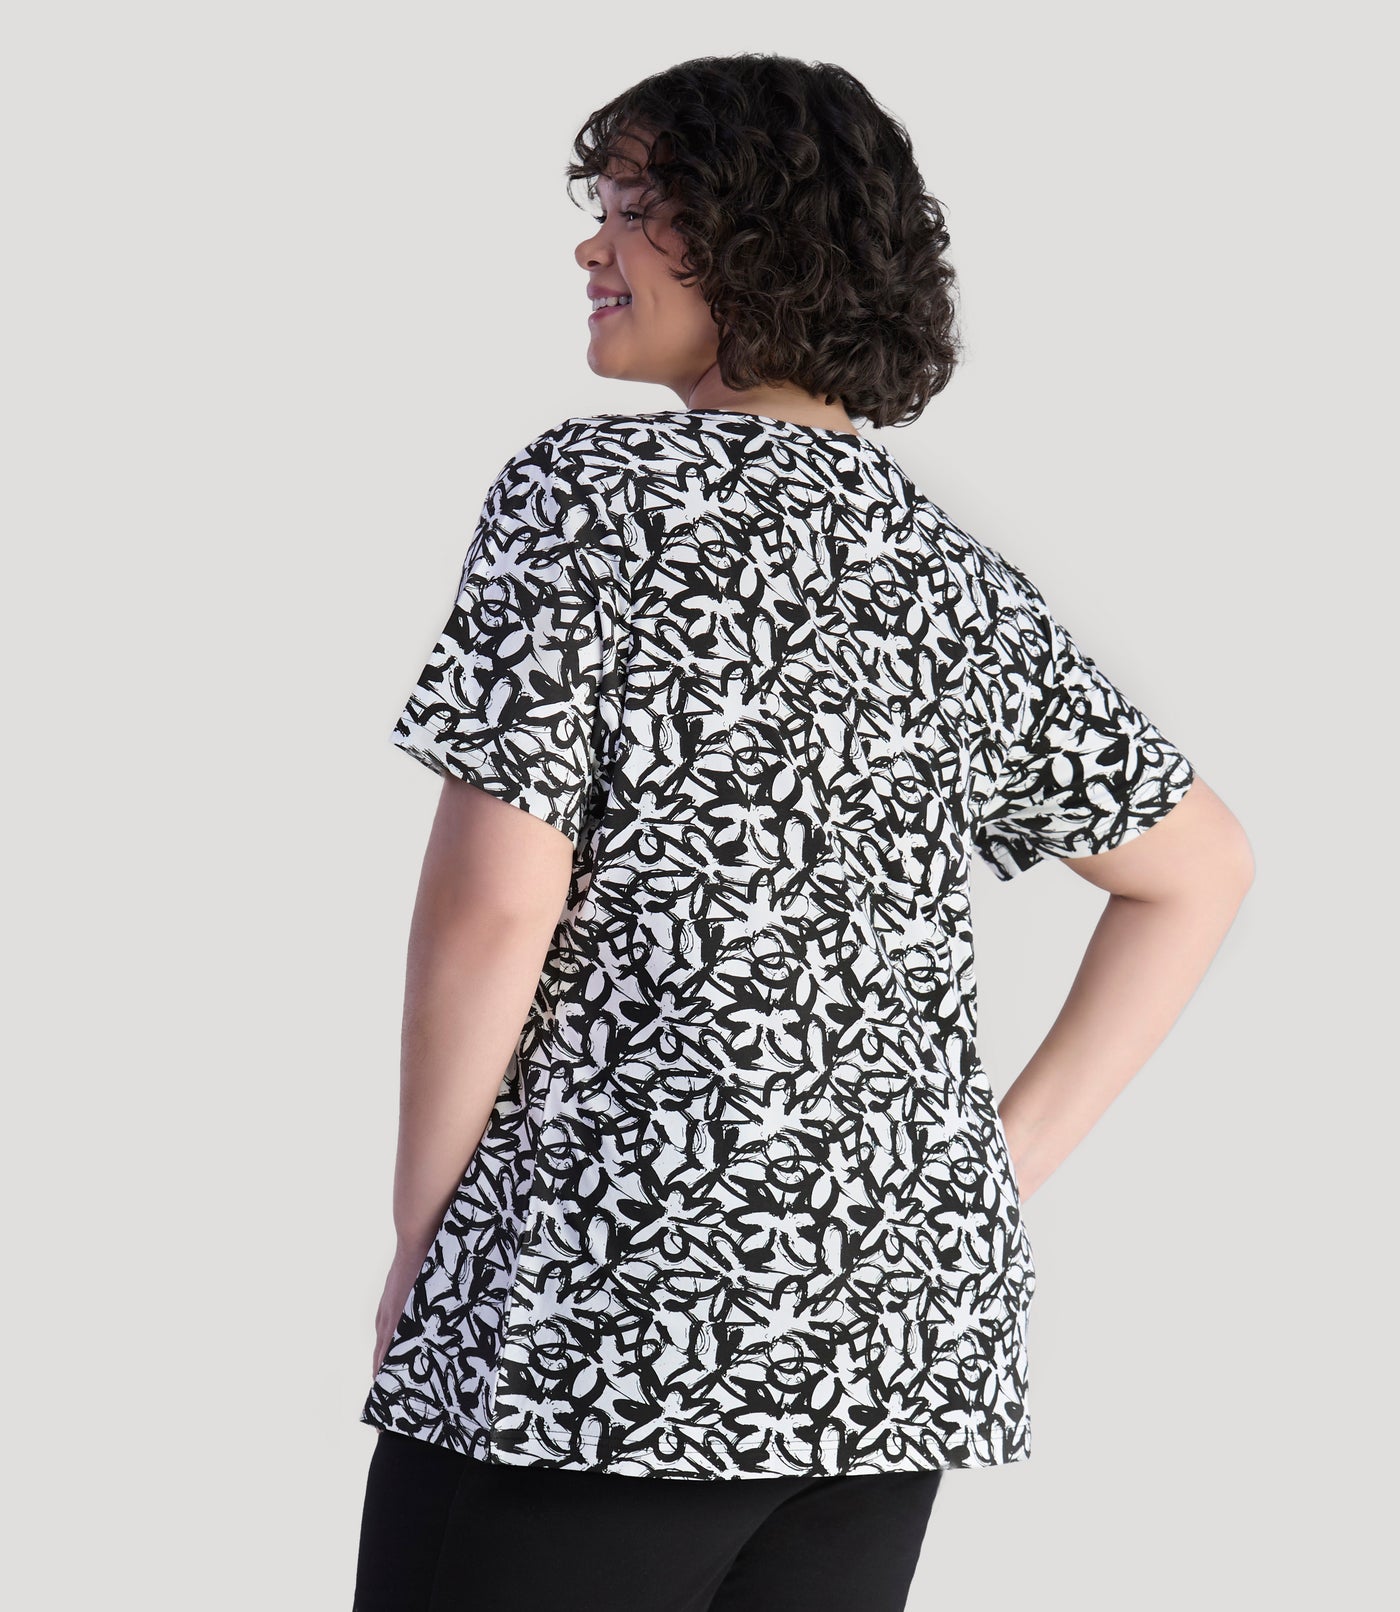 Model, facing back, wearing JunoActive's Junonia Lifestyle printed short sleeve neck top in color black and white wildflower print.